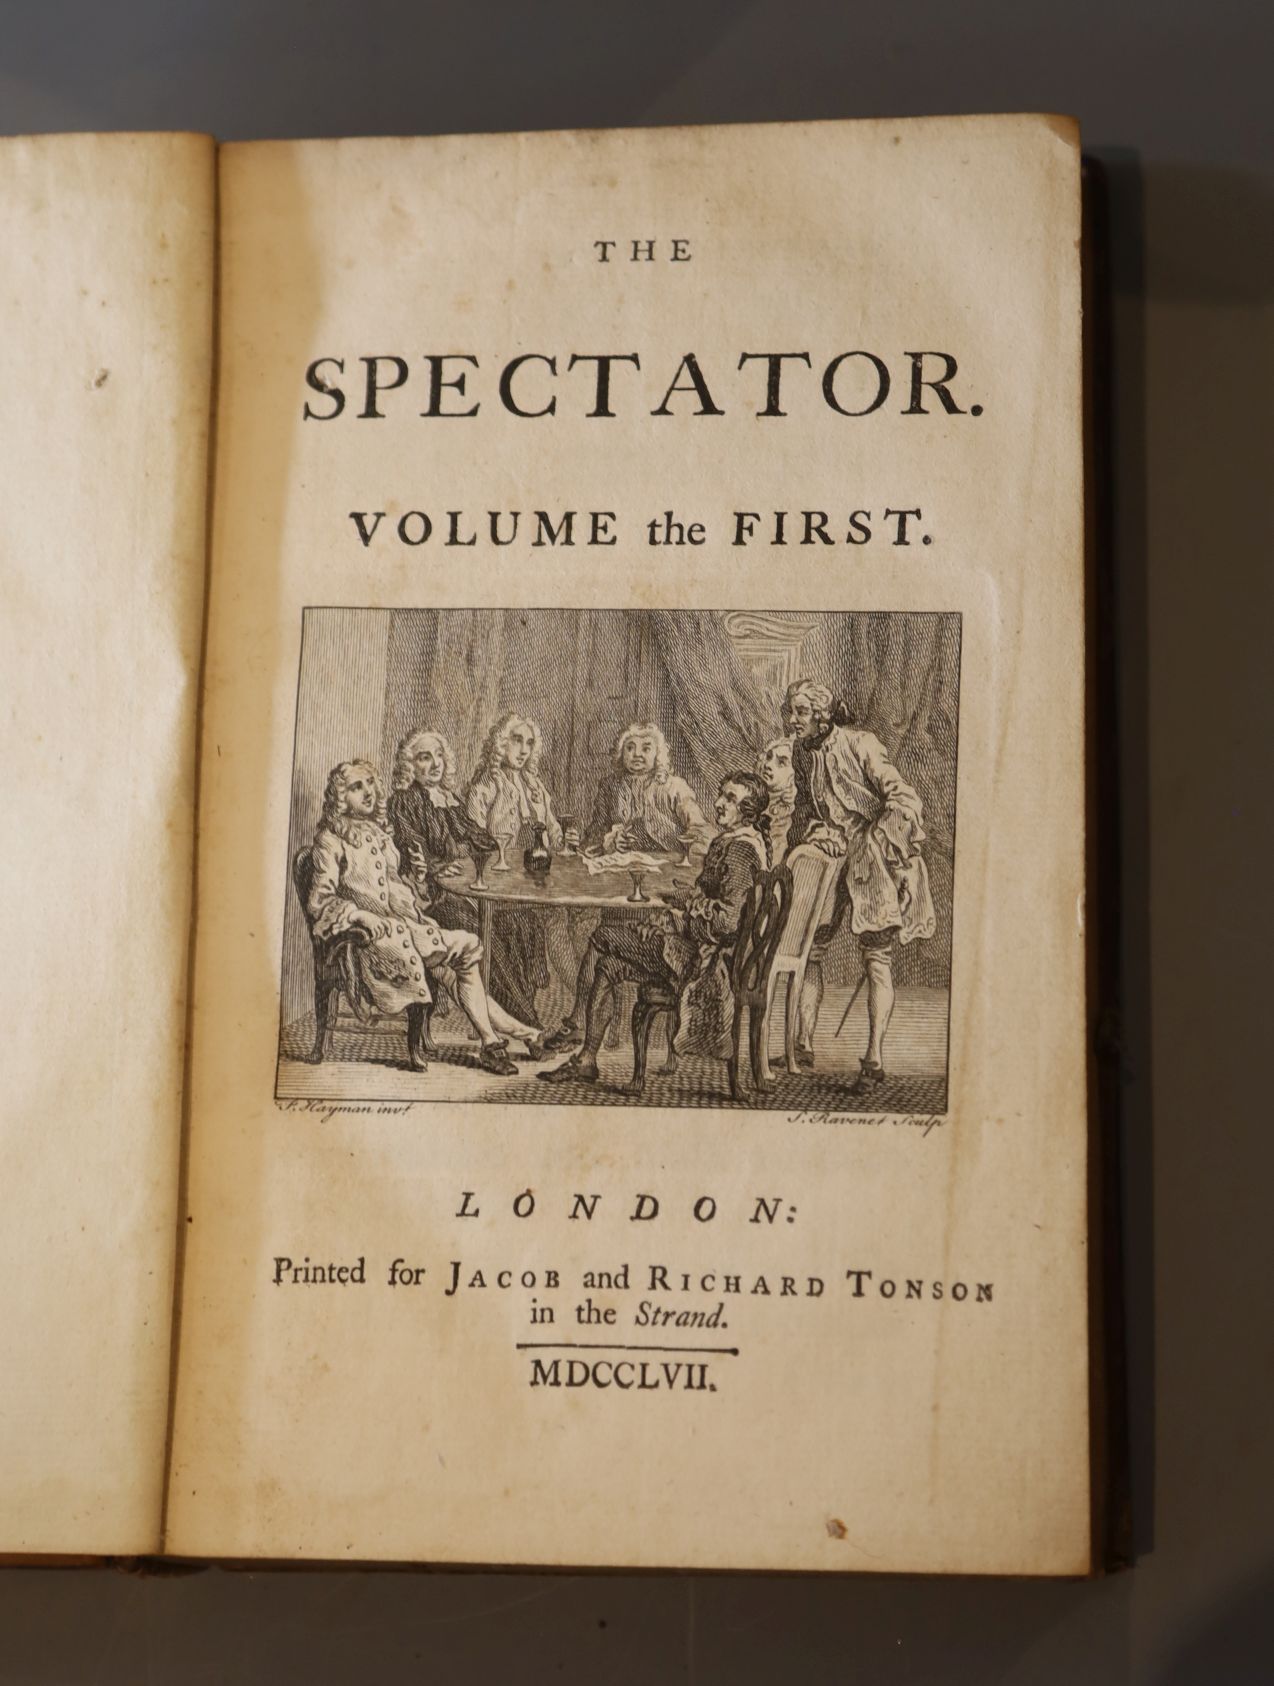 Spectator - The Spectator [By Addison, Steele and others], 8 vols, 8vo, calf, front board to vol. - Image 2 of 2